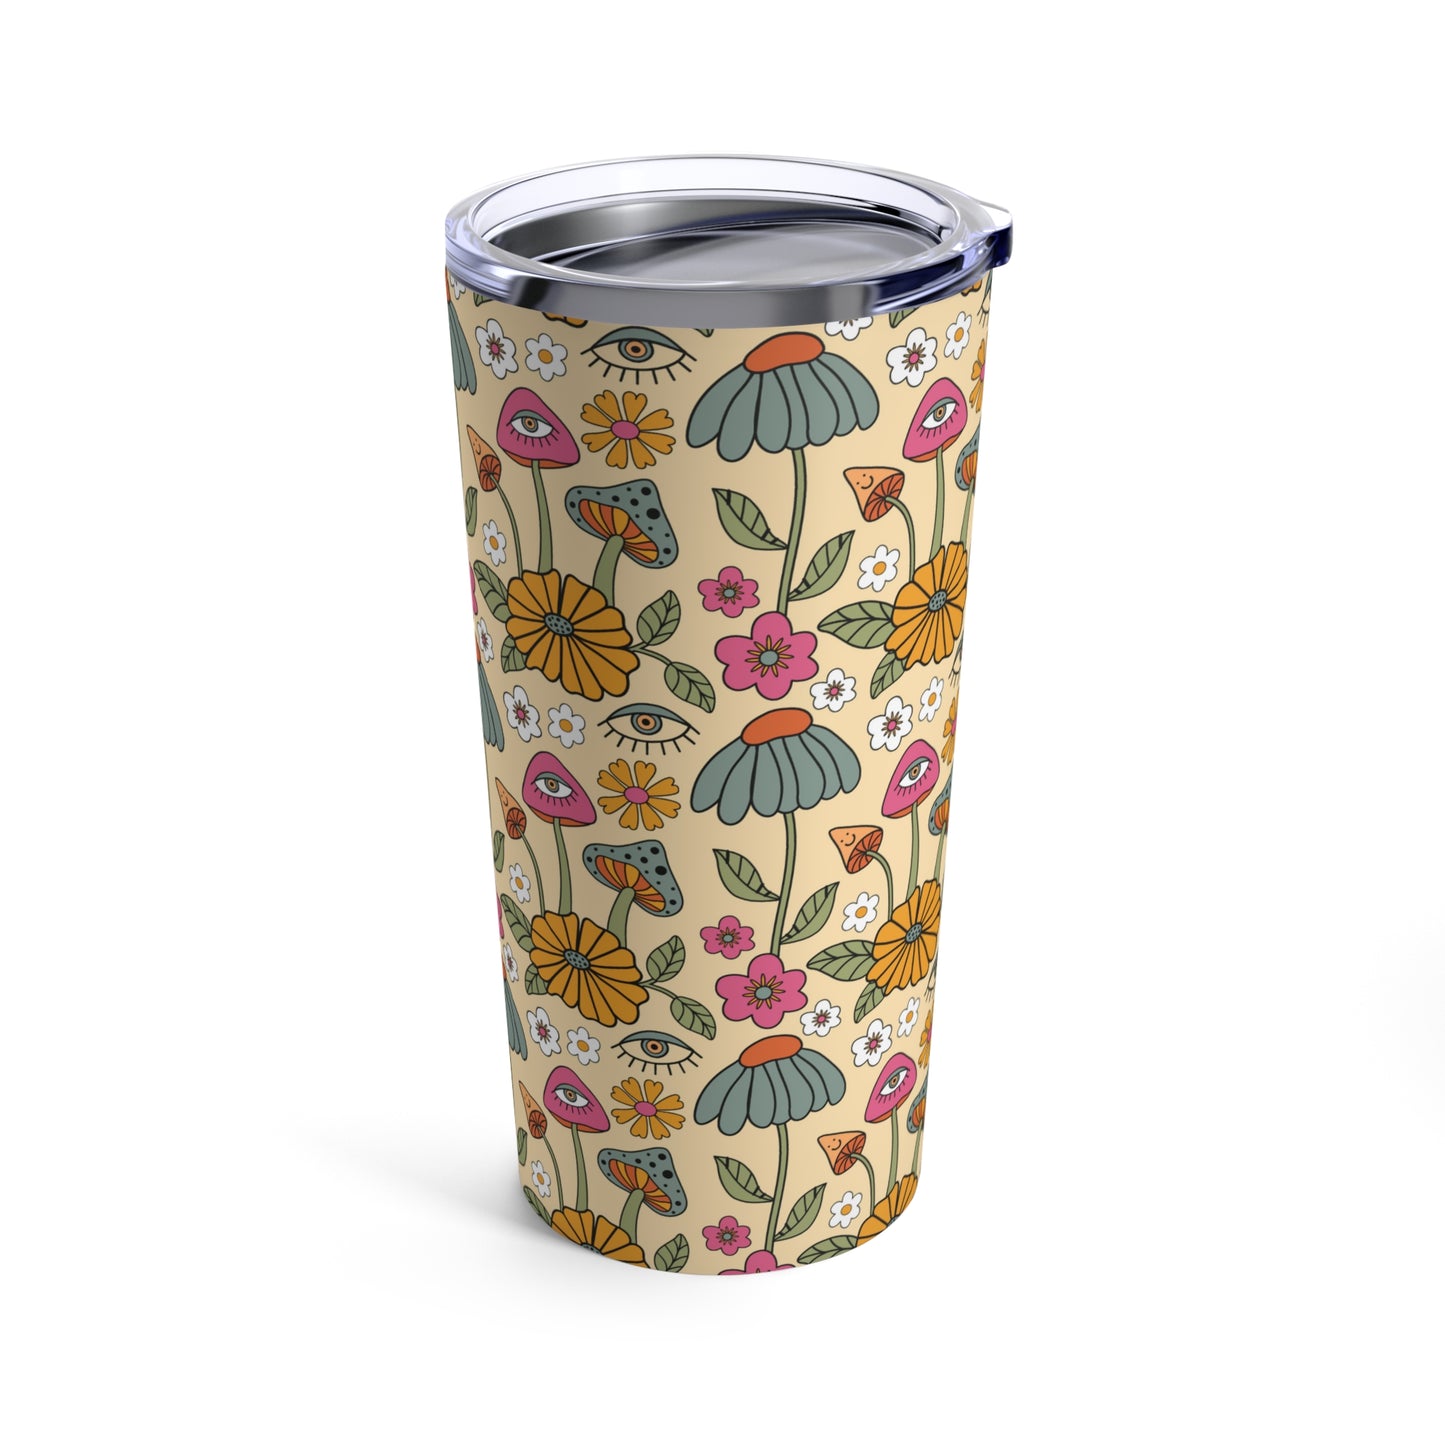 Groovy stainless Tumbler 20oz for her. Vacuum insulated with groovy mushroom and flowers. Christmas gift for family or friends